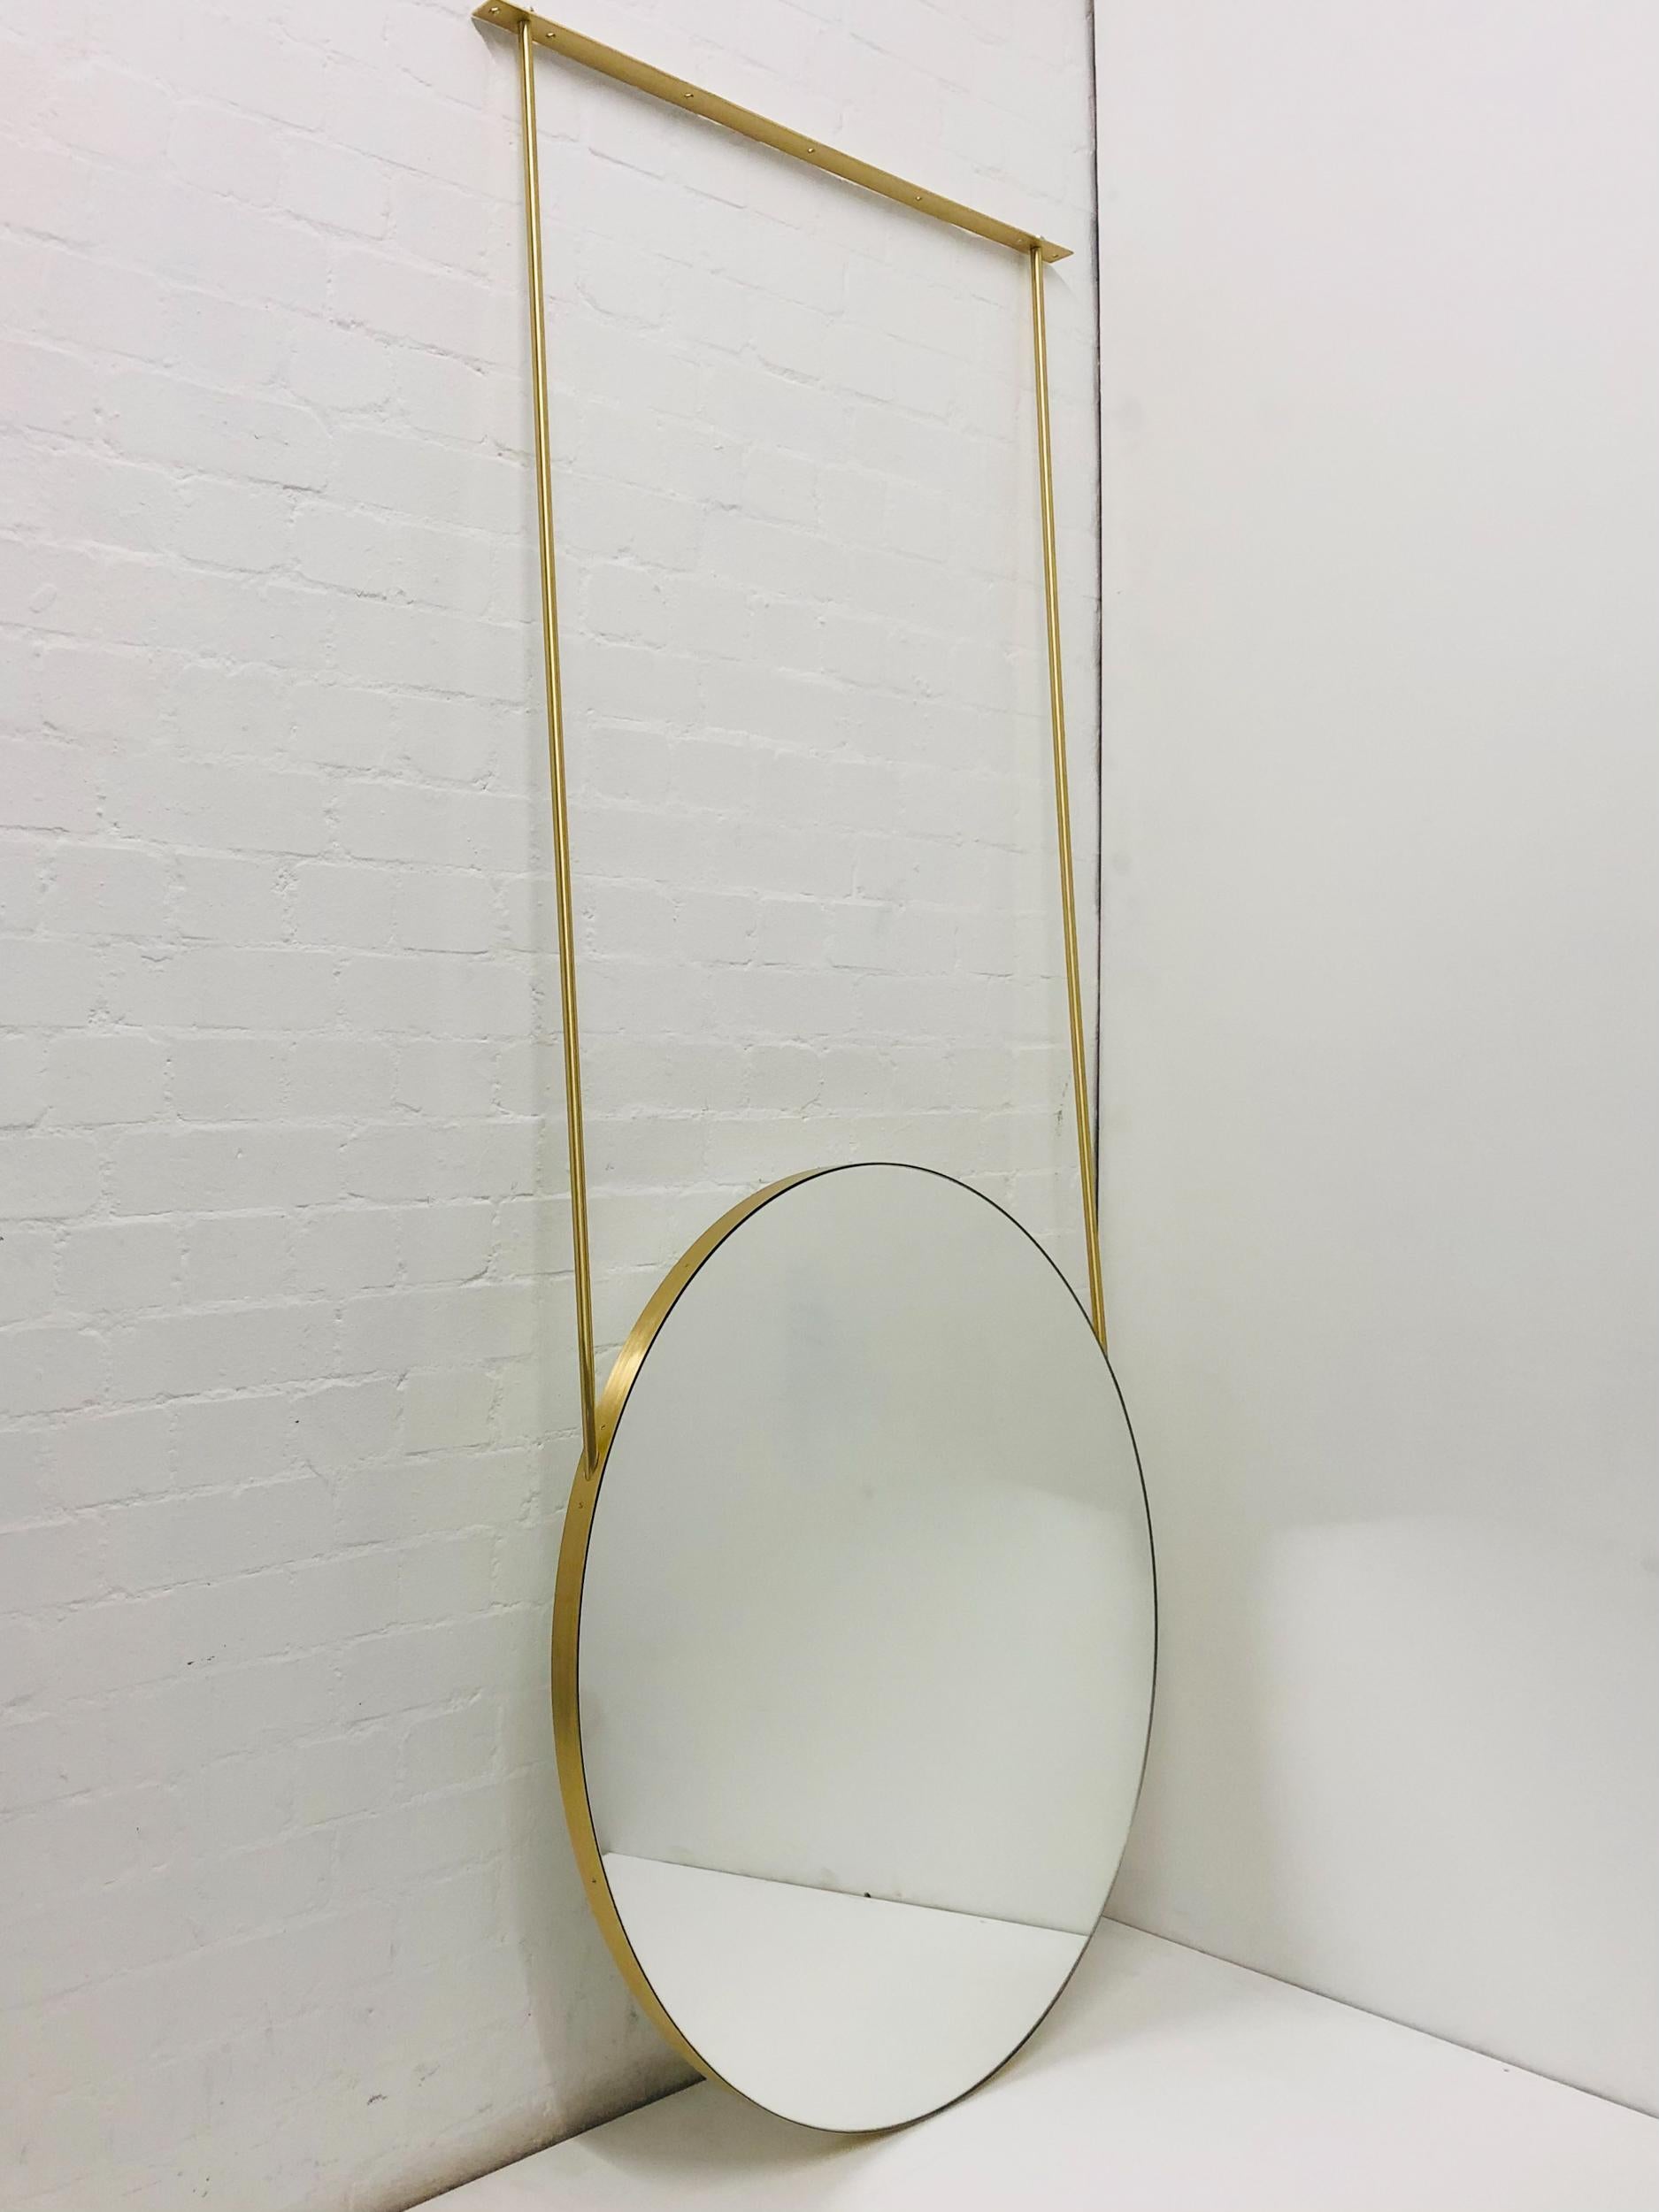 British Orbis Suspended Double Sided Round Mirror with Brushed Brass Frame and Two Arms For Sale